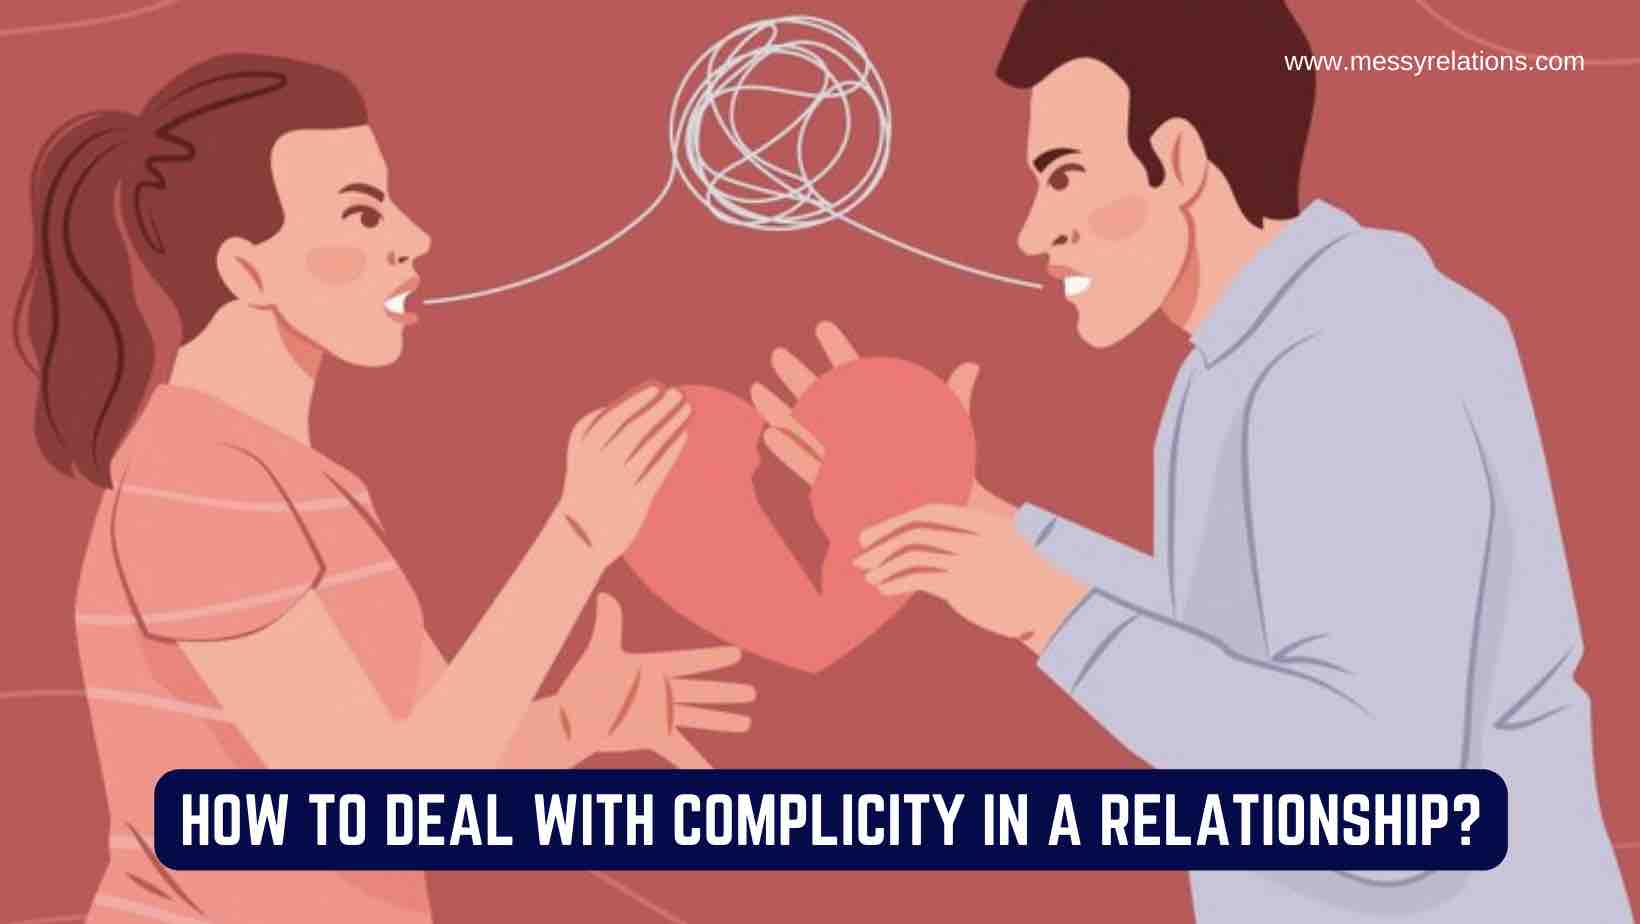 Complicity in Relationships